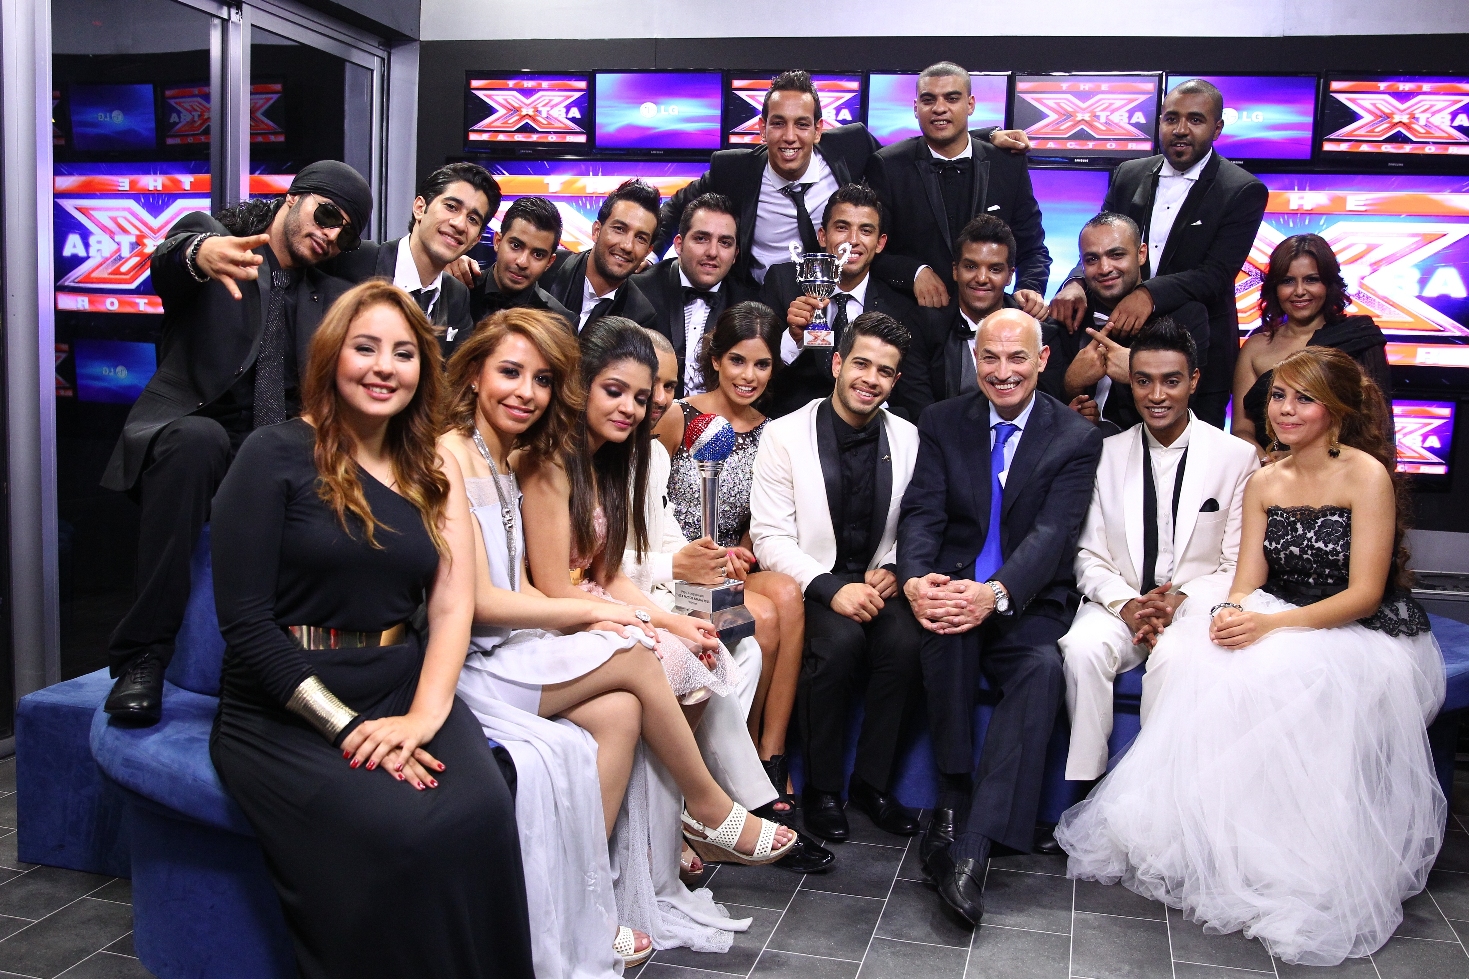 PepsiCo's Asia  Middle East and Africa CEO Saad Abdul-Latif with THE X FACTOR Contestants